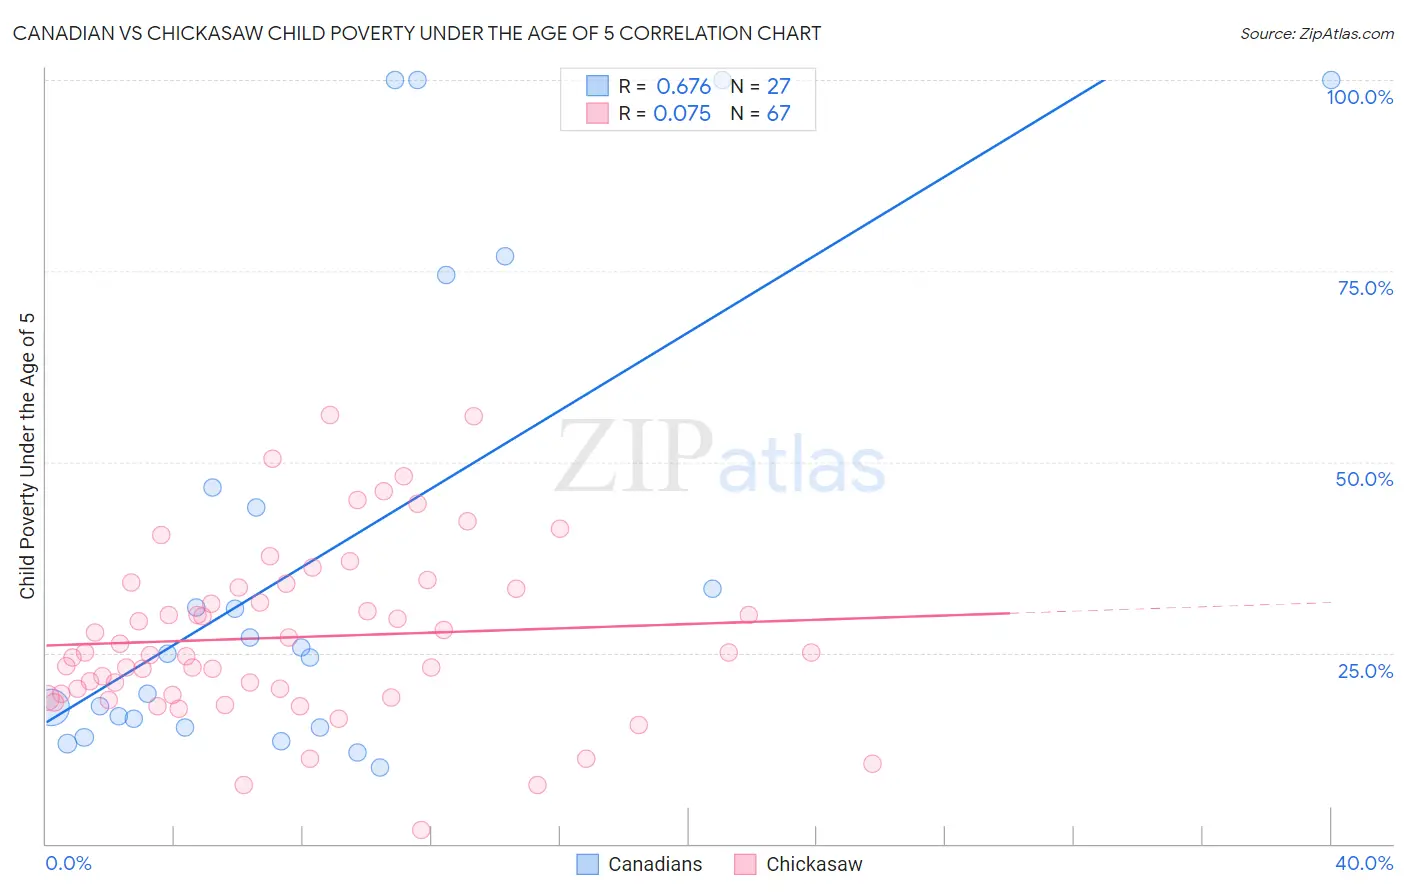 Canadian vs Chickasaw Child Poverty Under the Age of 5